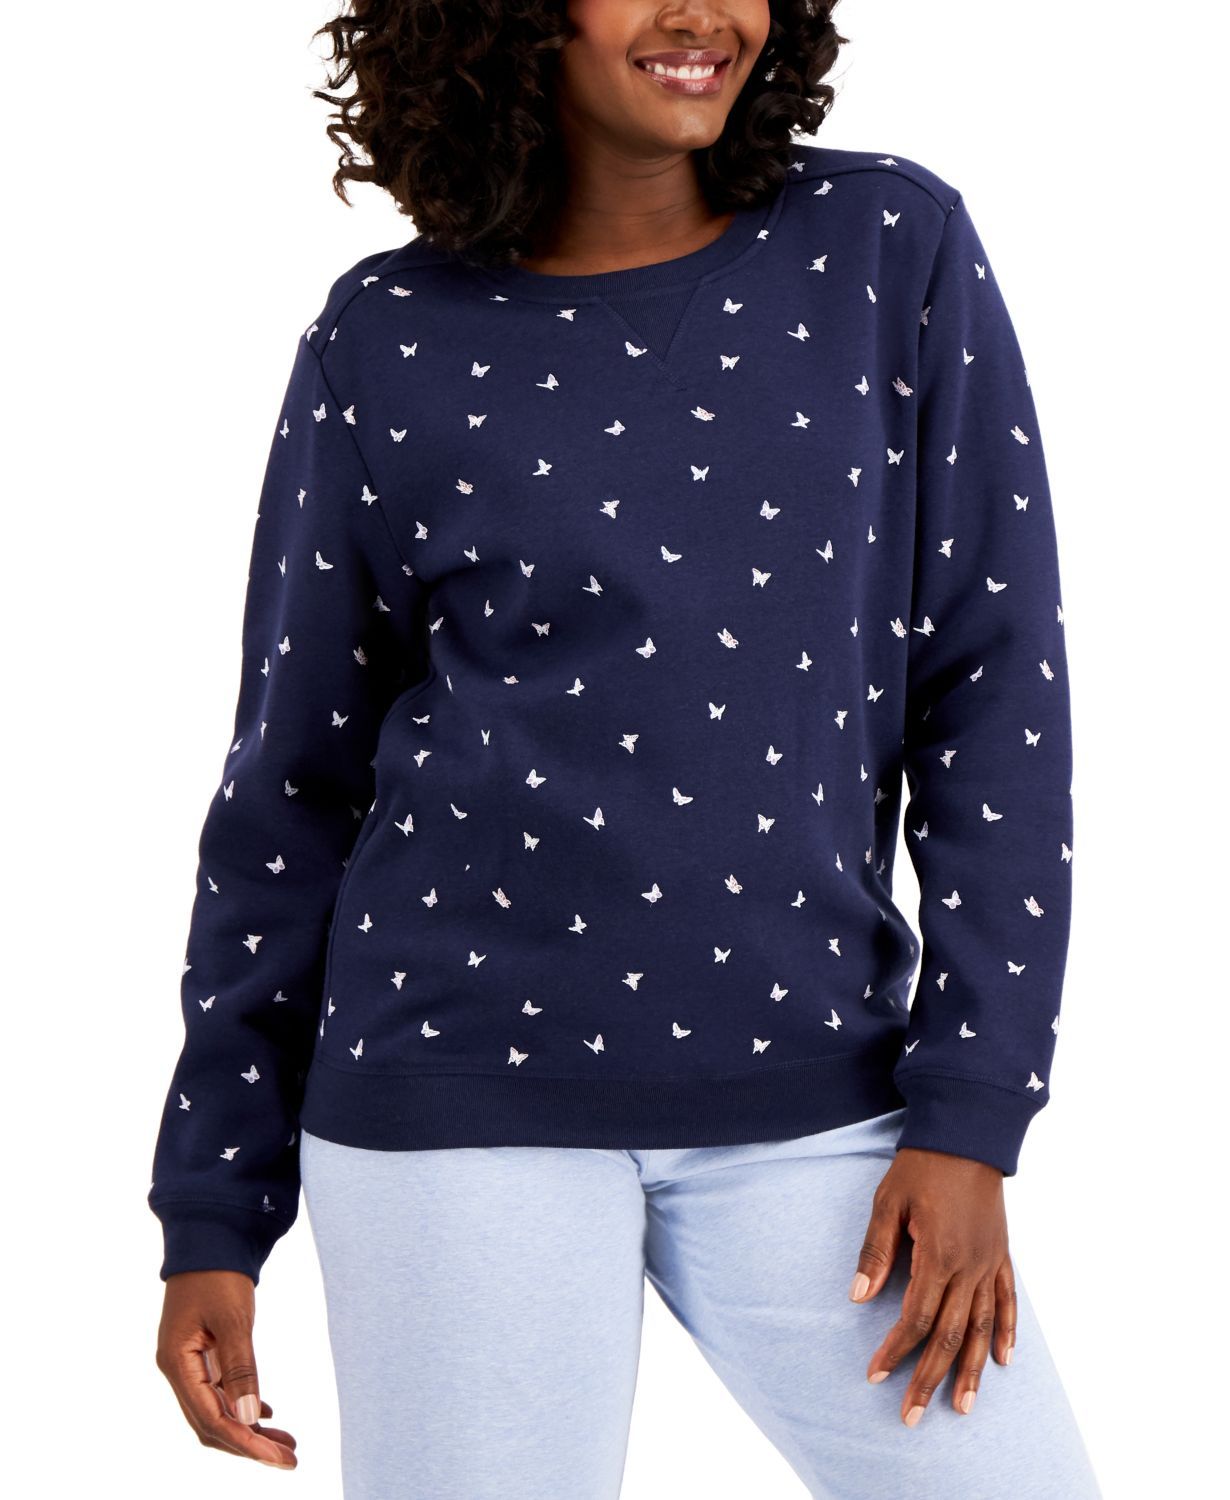 Blue, XL Womens Casual Long Sleeve Sweatshirt Crew Neck Cute Pullover Relaxed Fit Tops 